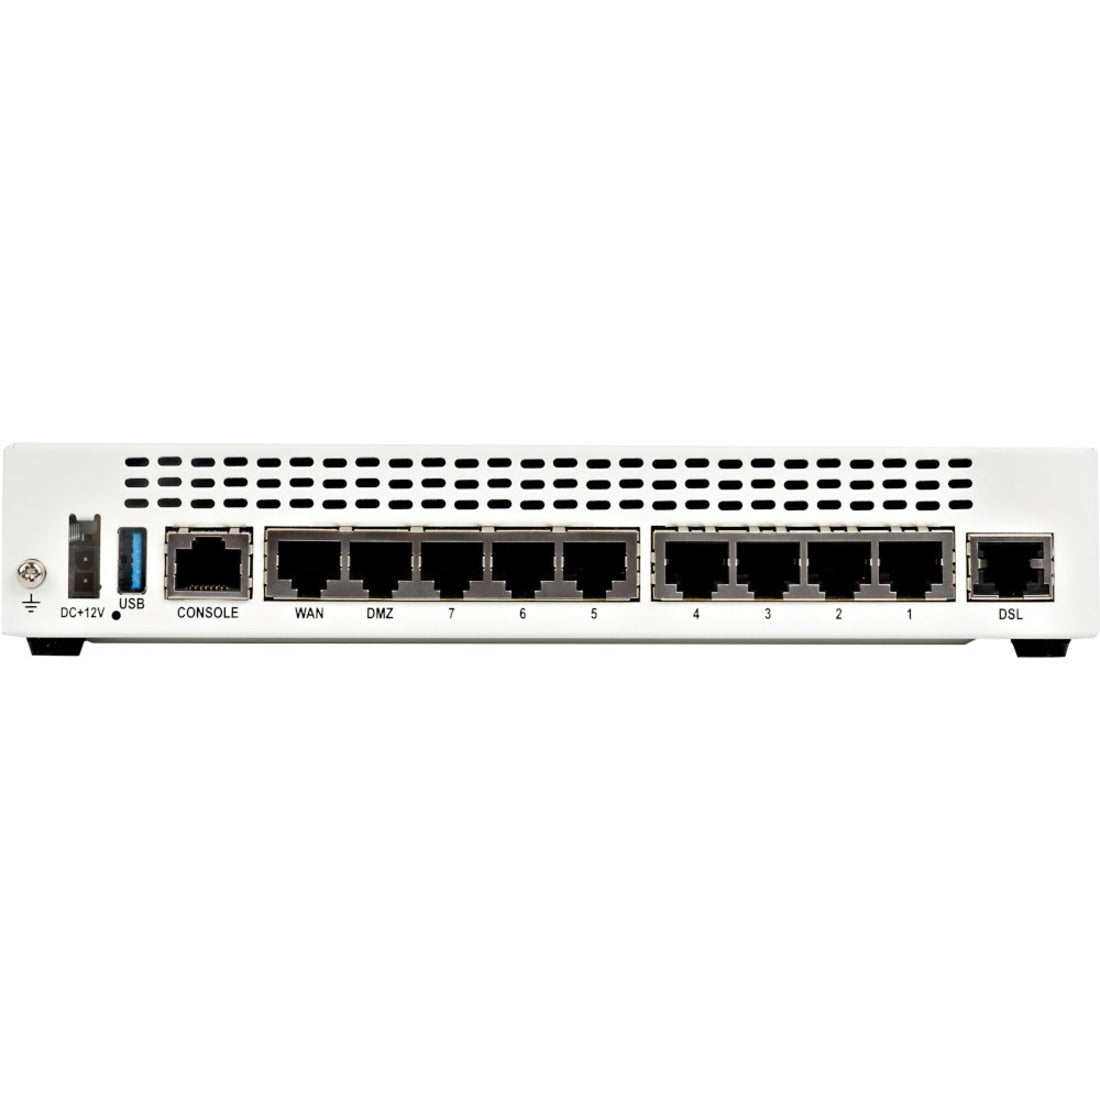 Fortinet FortiGate FG-60E-DSL Network Security/Firewall Appliance